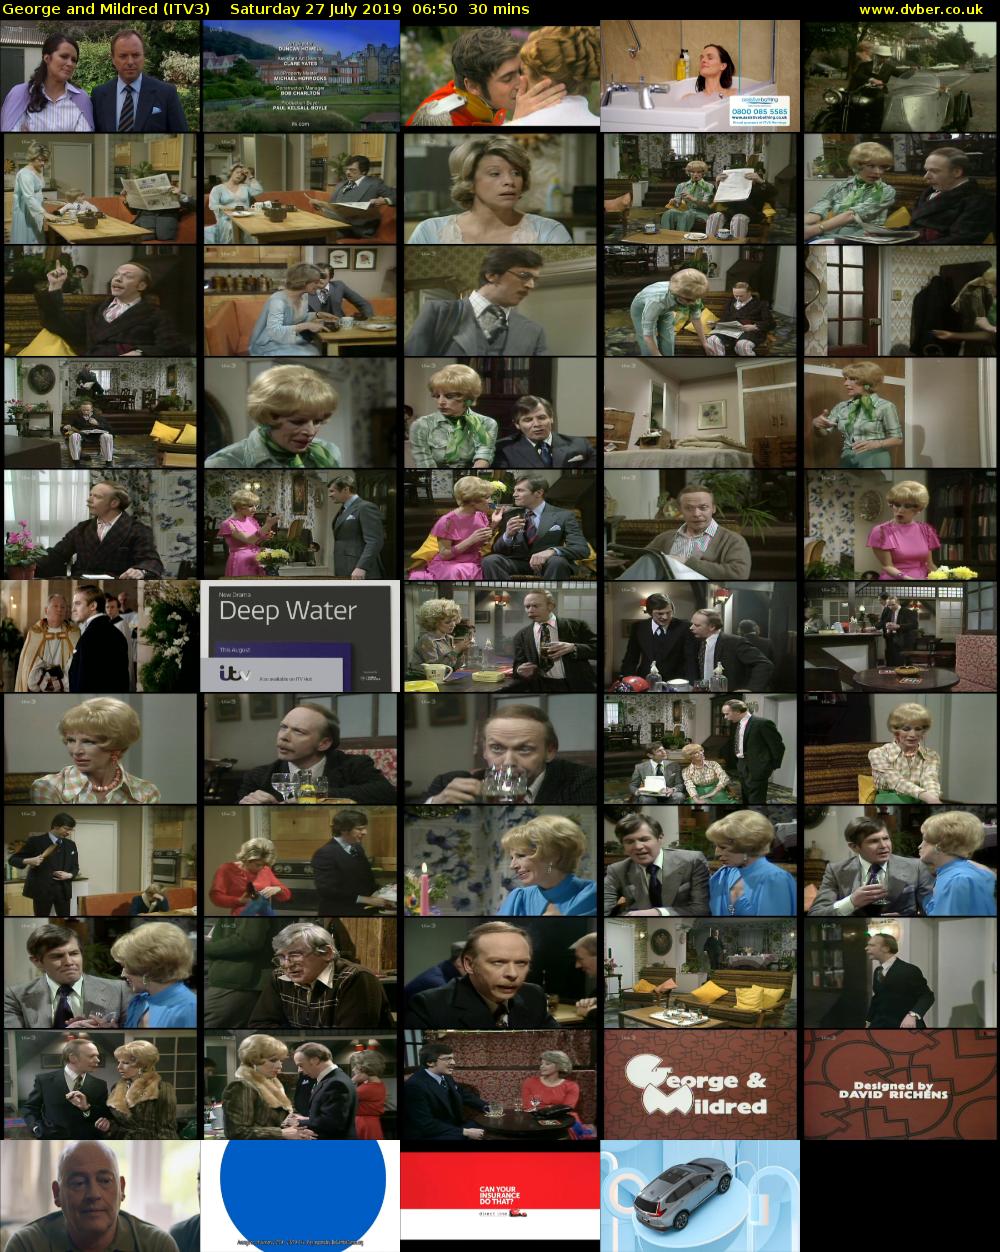 George and Mildred (ITV3) Saturday 27 July 2019 06:50 - 07:20